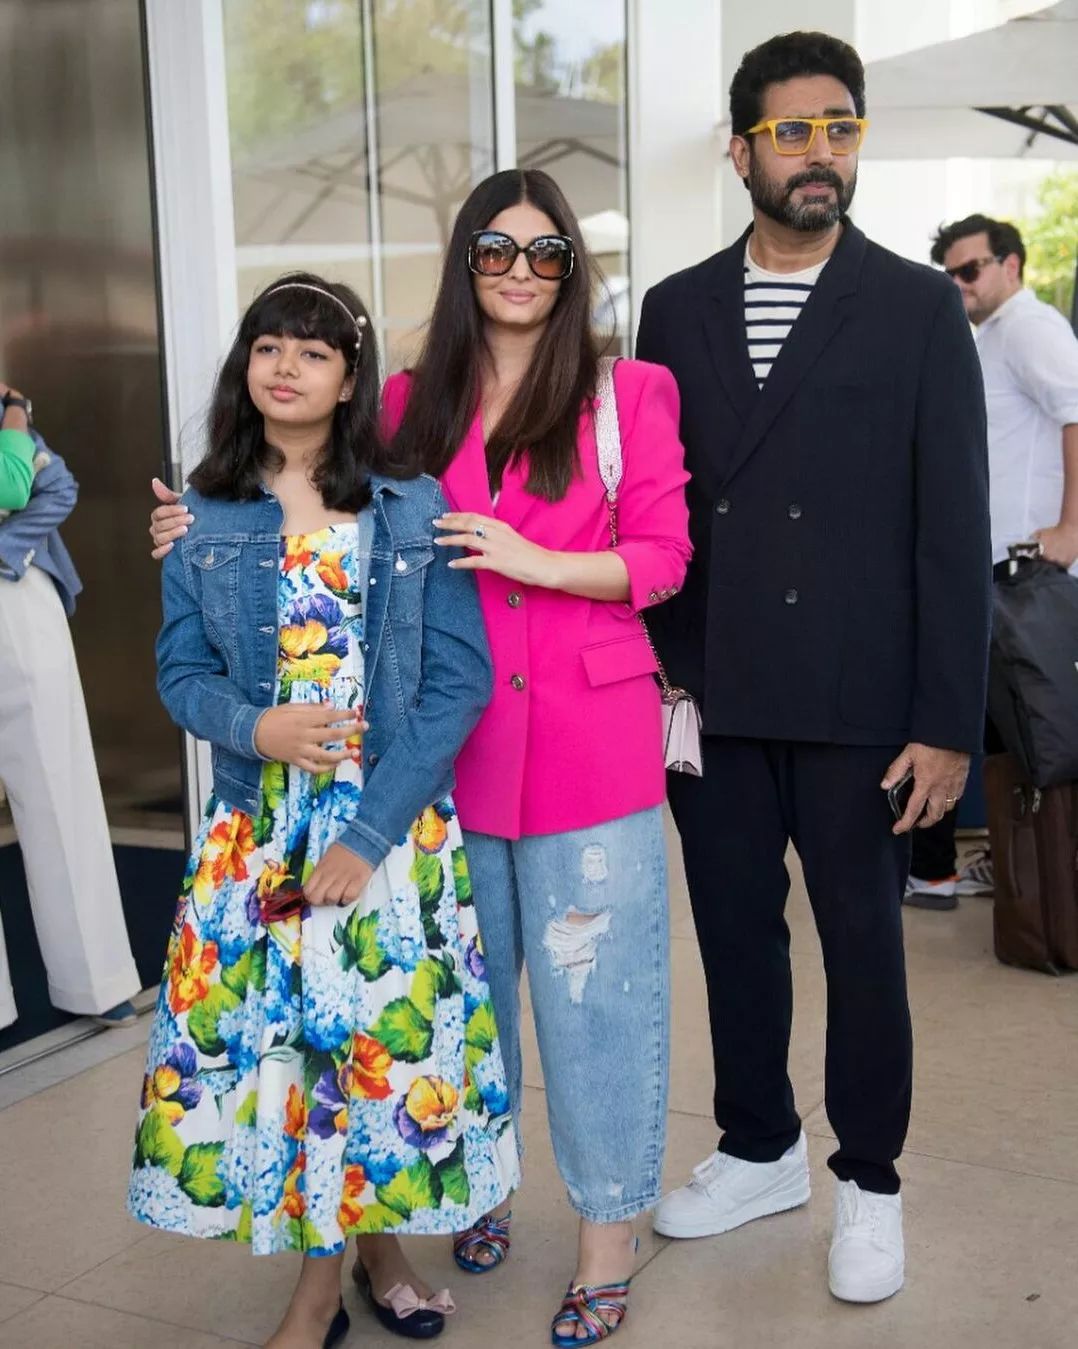 281845035 7569020589837968 8127258801139851807 n Proudly Amitabh Bachchan shared the photo of 'son, daughter-in-law and granddaughter', then Abhishek Bachchan commented and wrote – this is the progress report